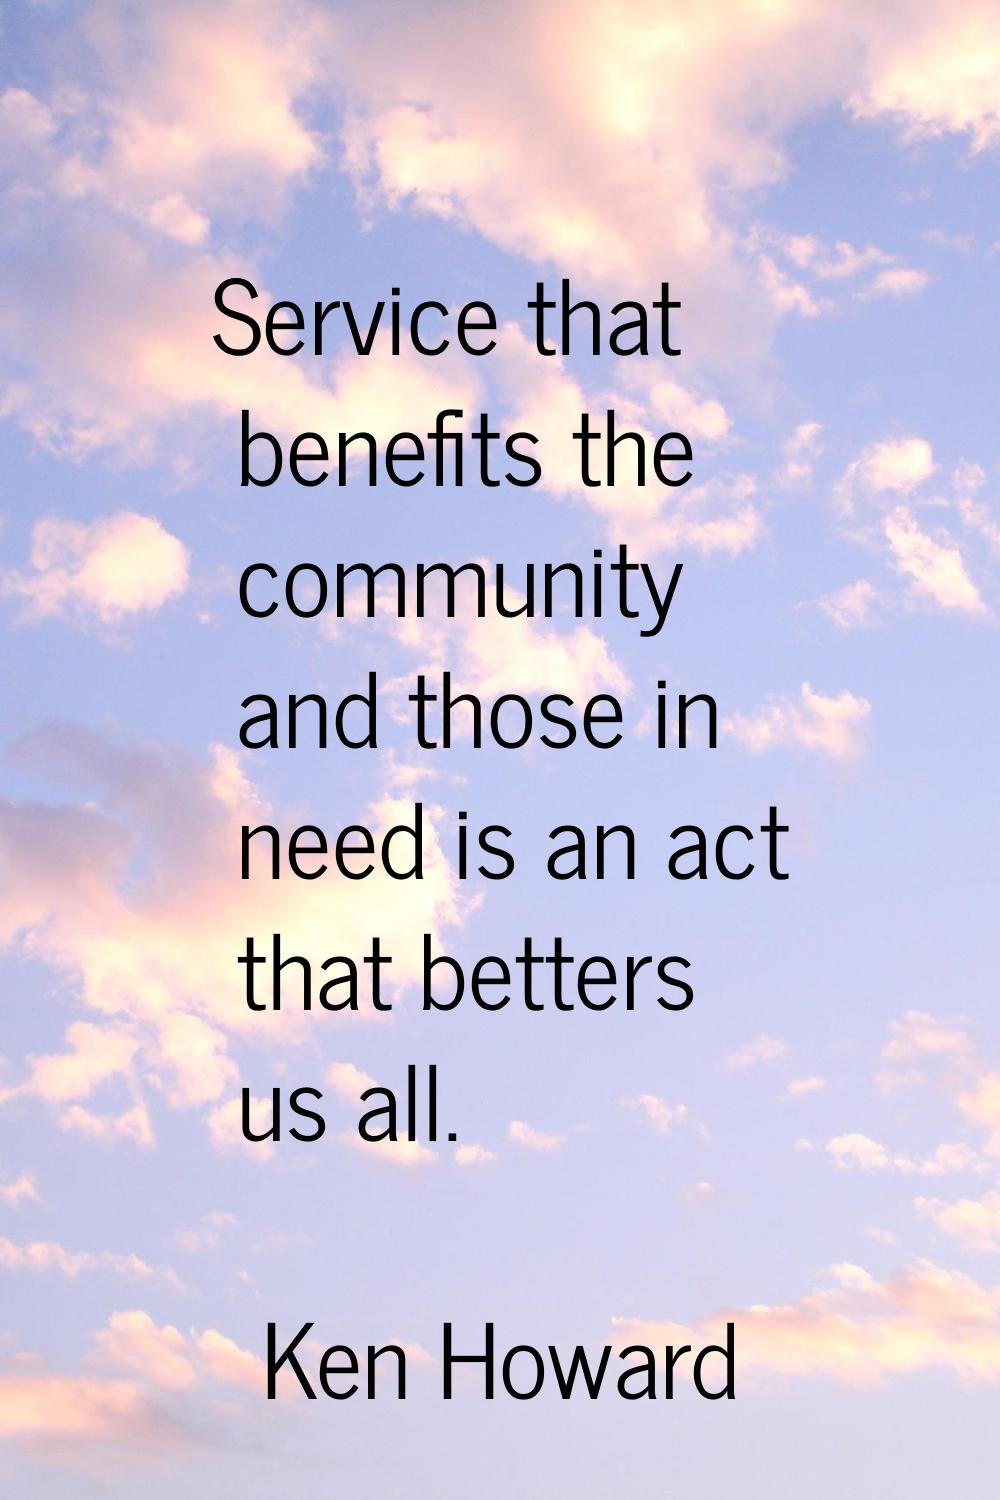 Service that benefits the community and those in need is an act that betters us all.